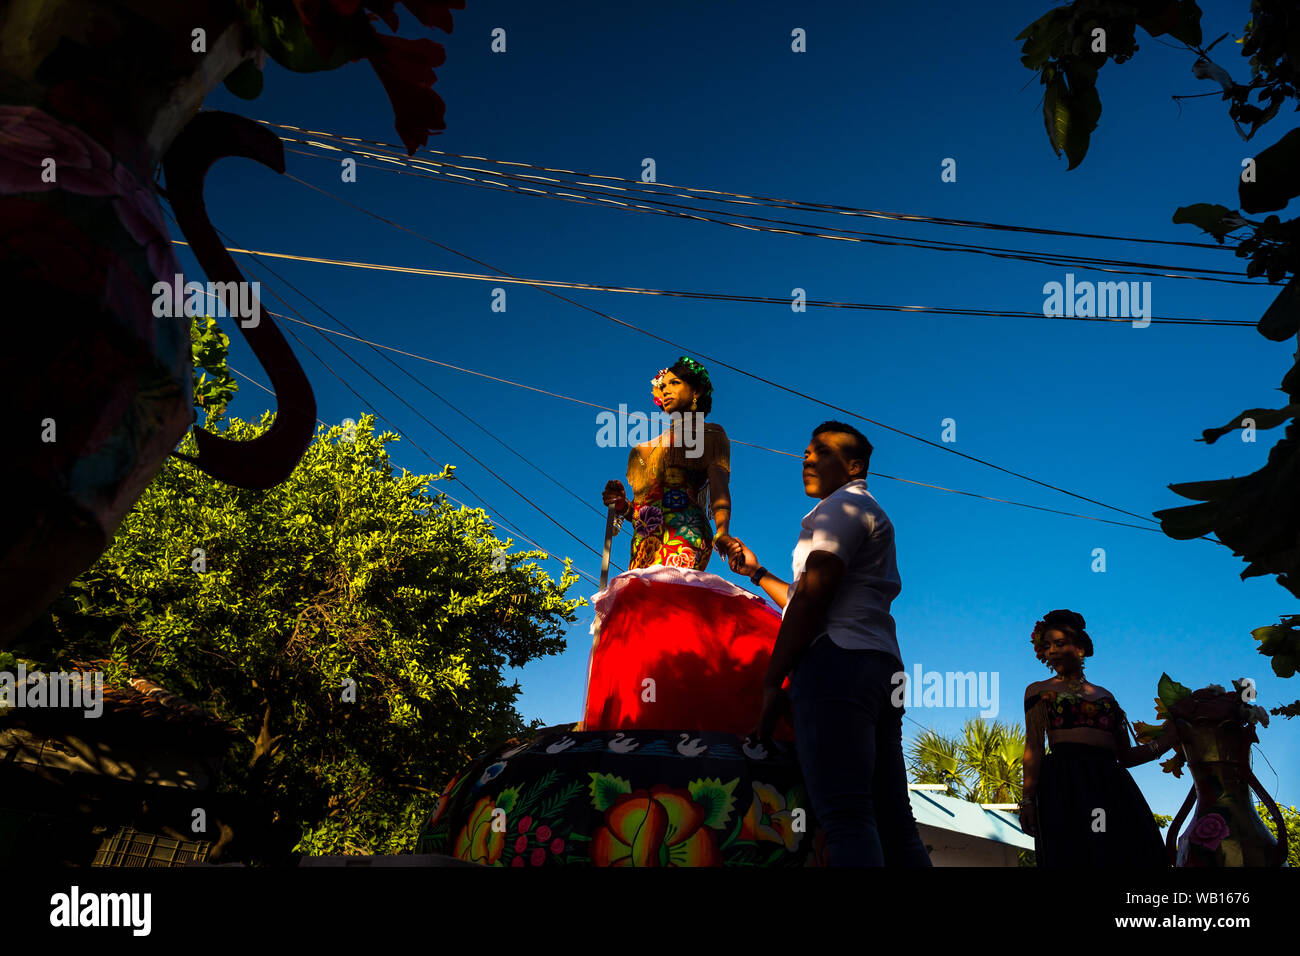 A Mexican “muxe” (typically, a homosexual man wearing female clothes) performs on a float during the festival in Juchitán de Zaragoza, Mexico. Stock Photo